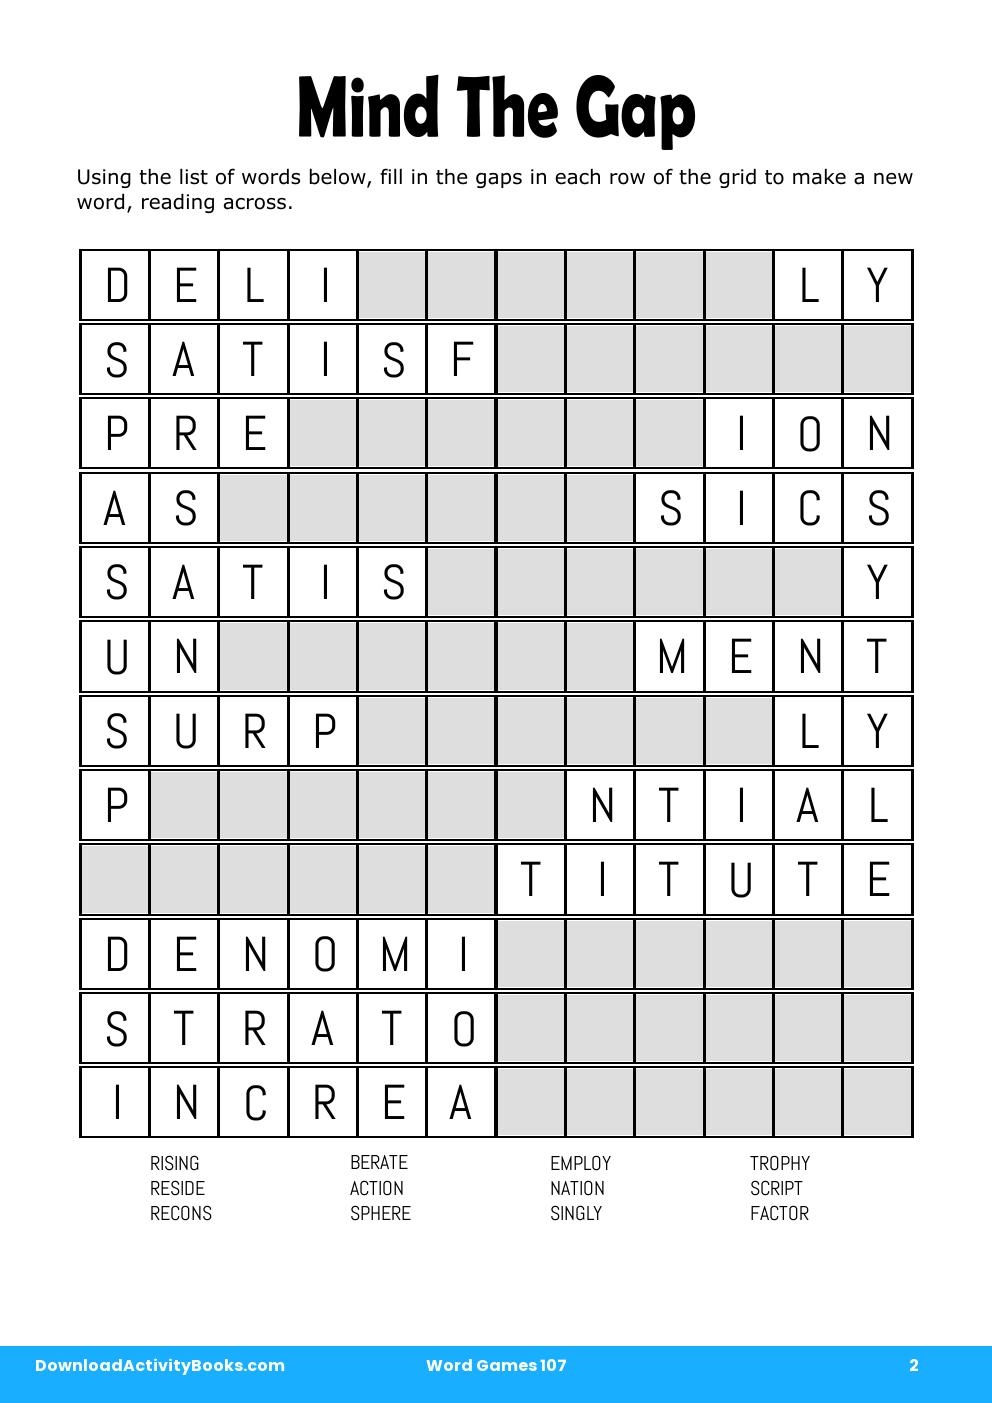 Mind The Gap in Word Games 107